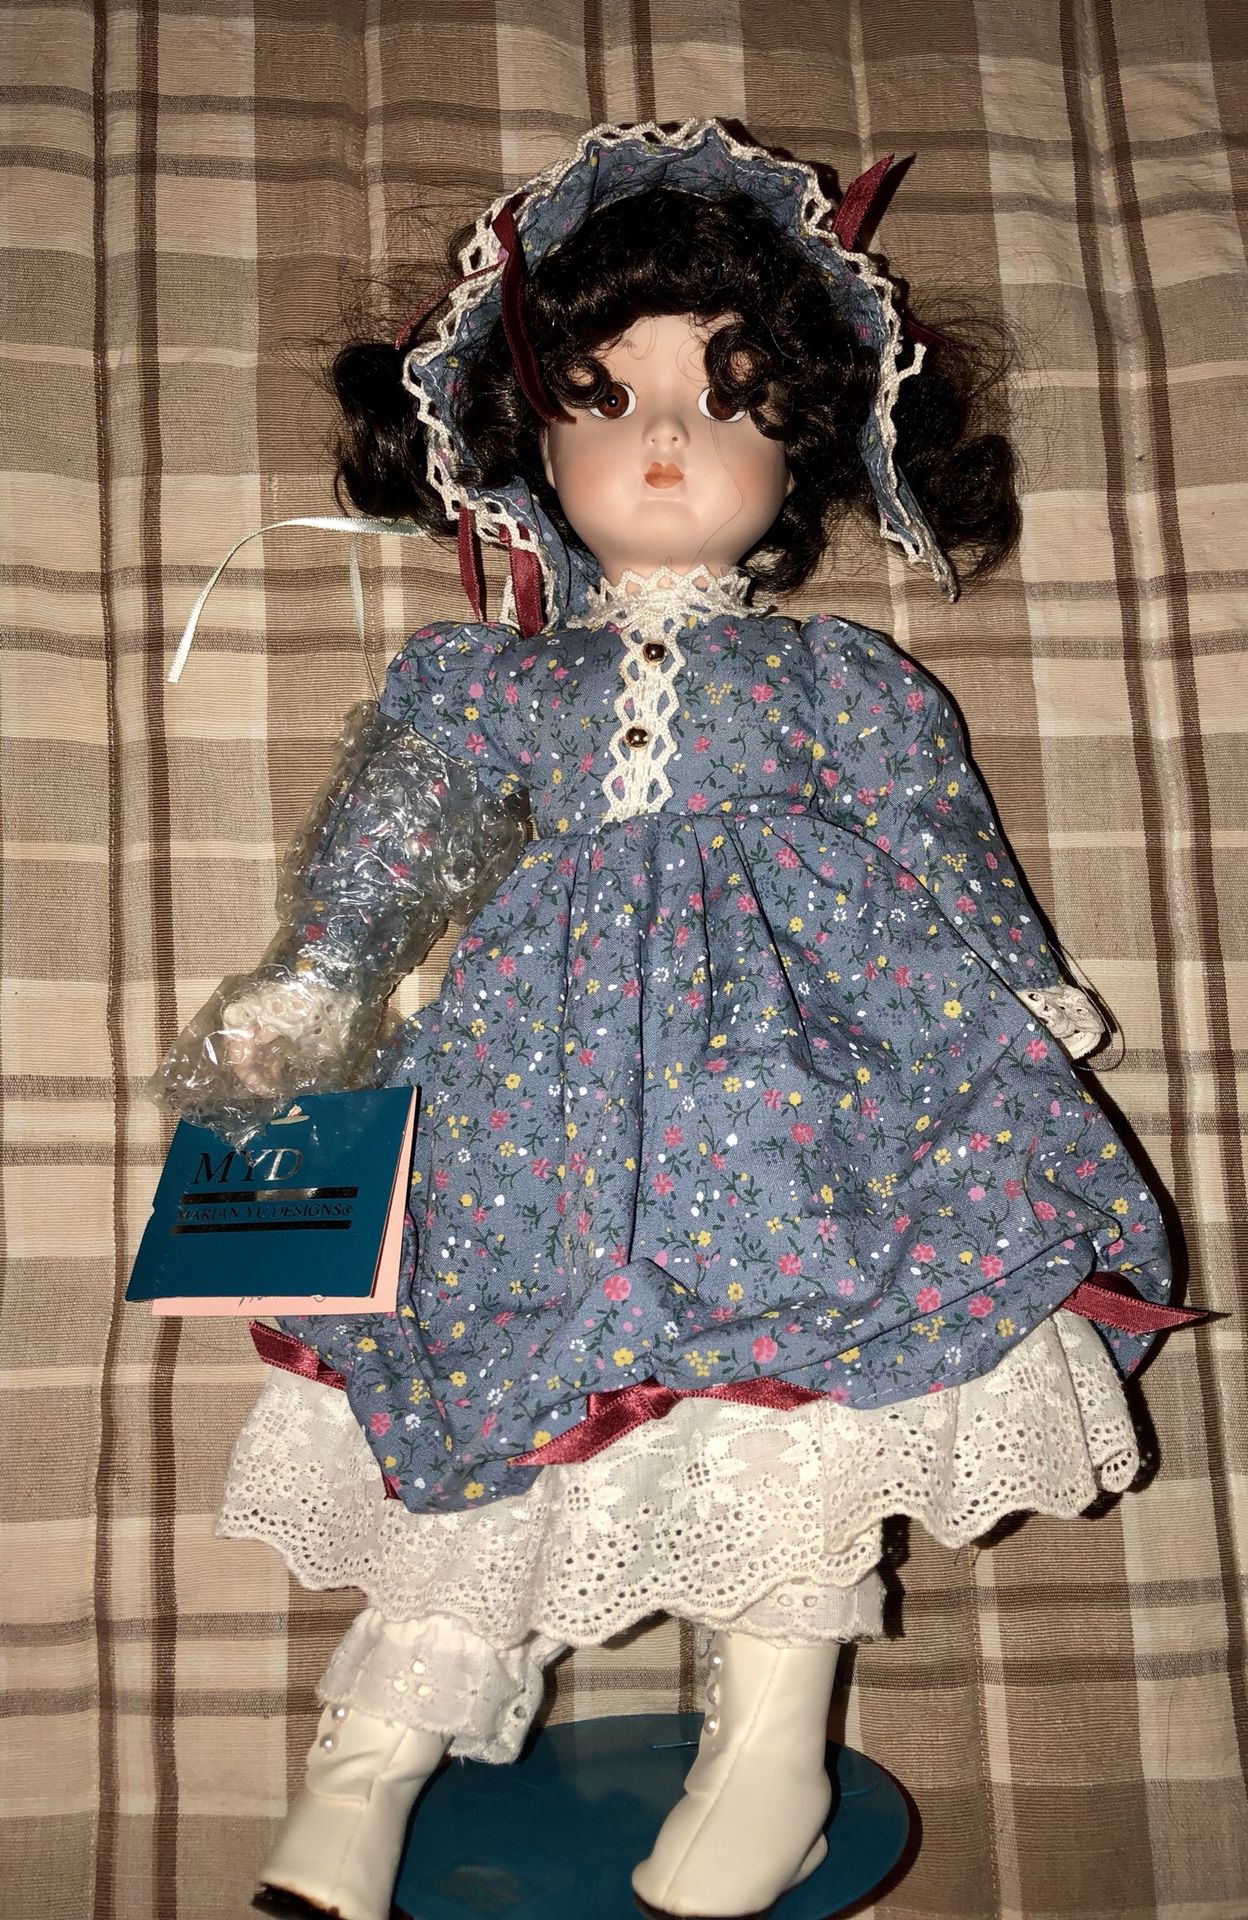 1988 Marian Yu Designs MYD -15" Blue Floral Dress Porcelain Doll. Dark hair & brown eyes. NEW with tags. Comes with doll stand.